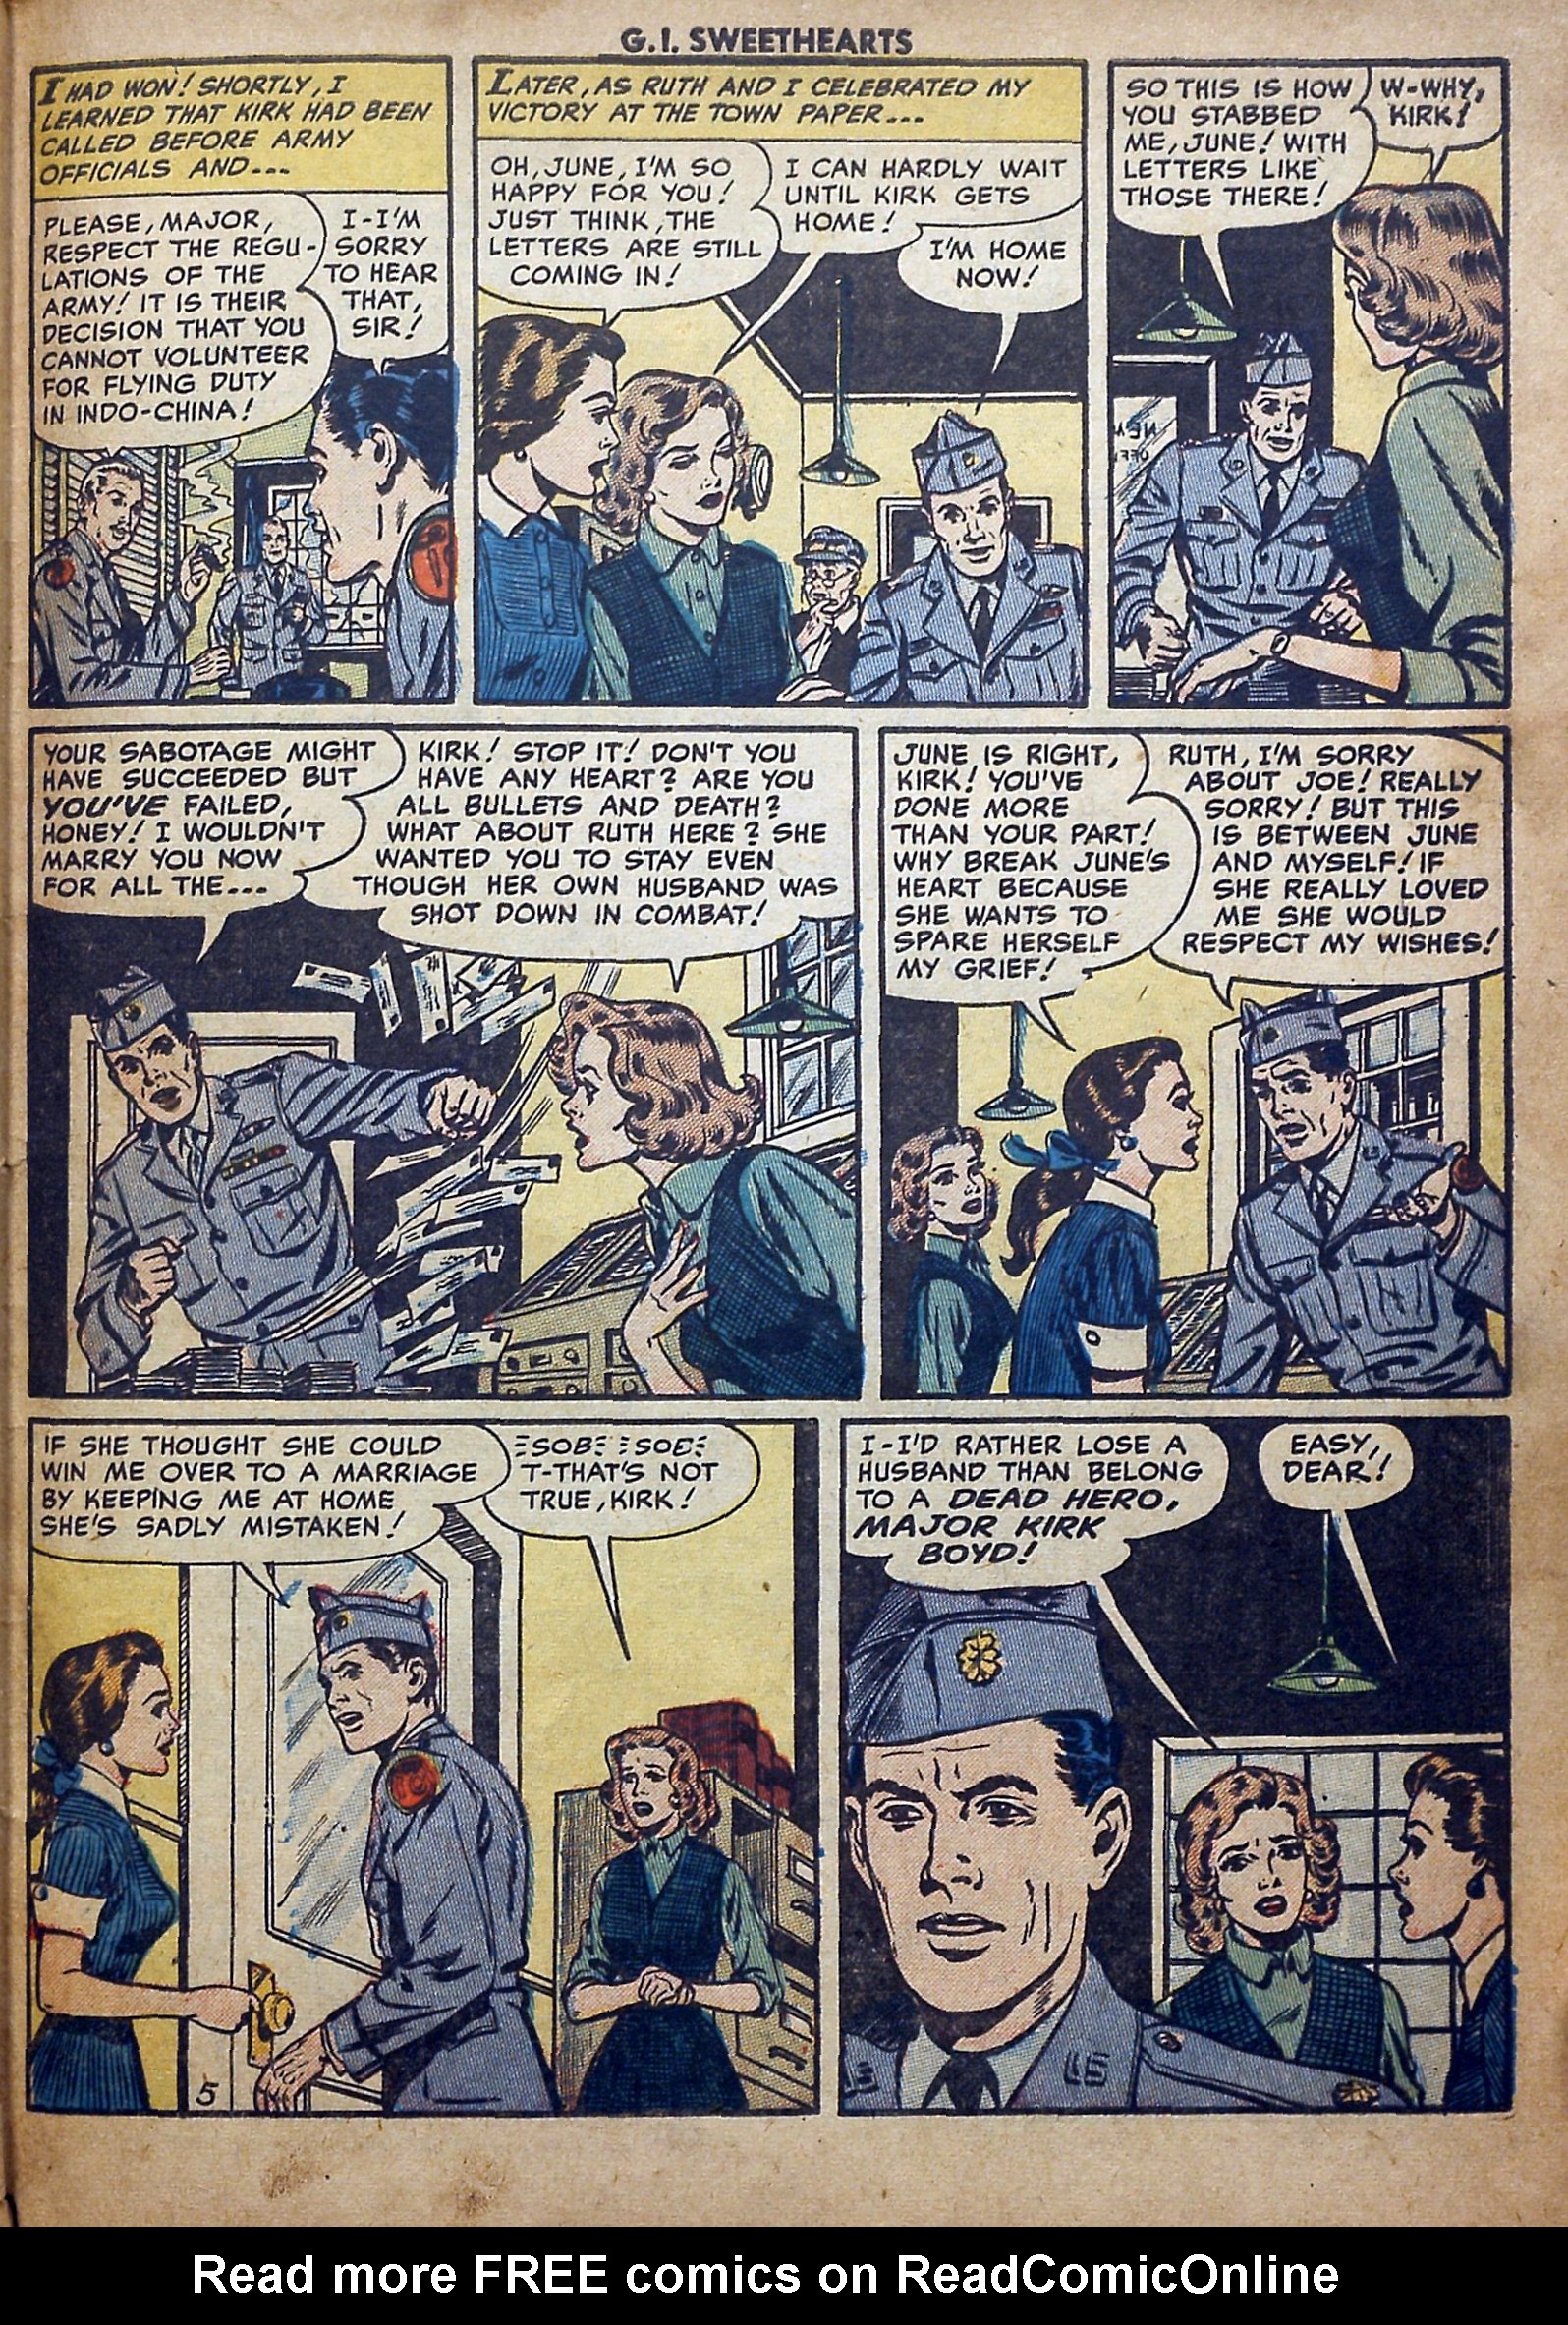 Read online G.I. Sweethearts comic -  Issue #39 - 31